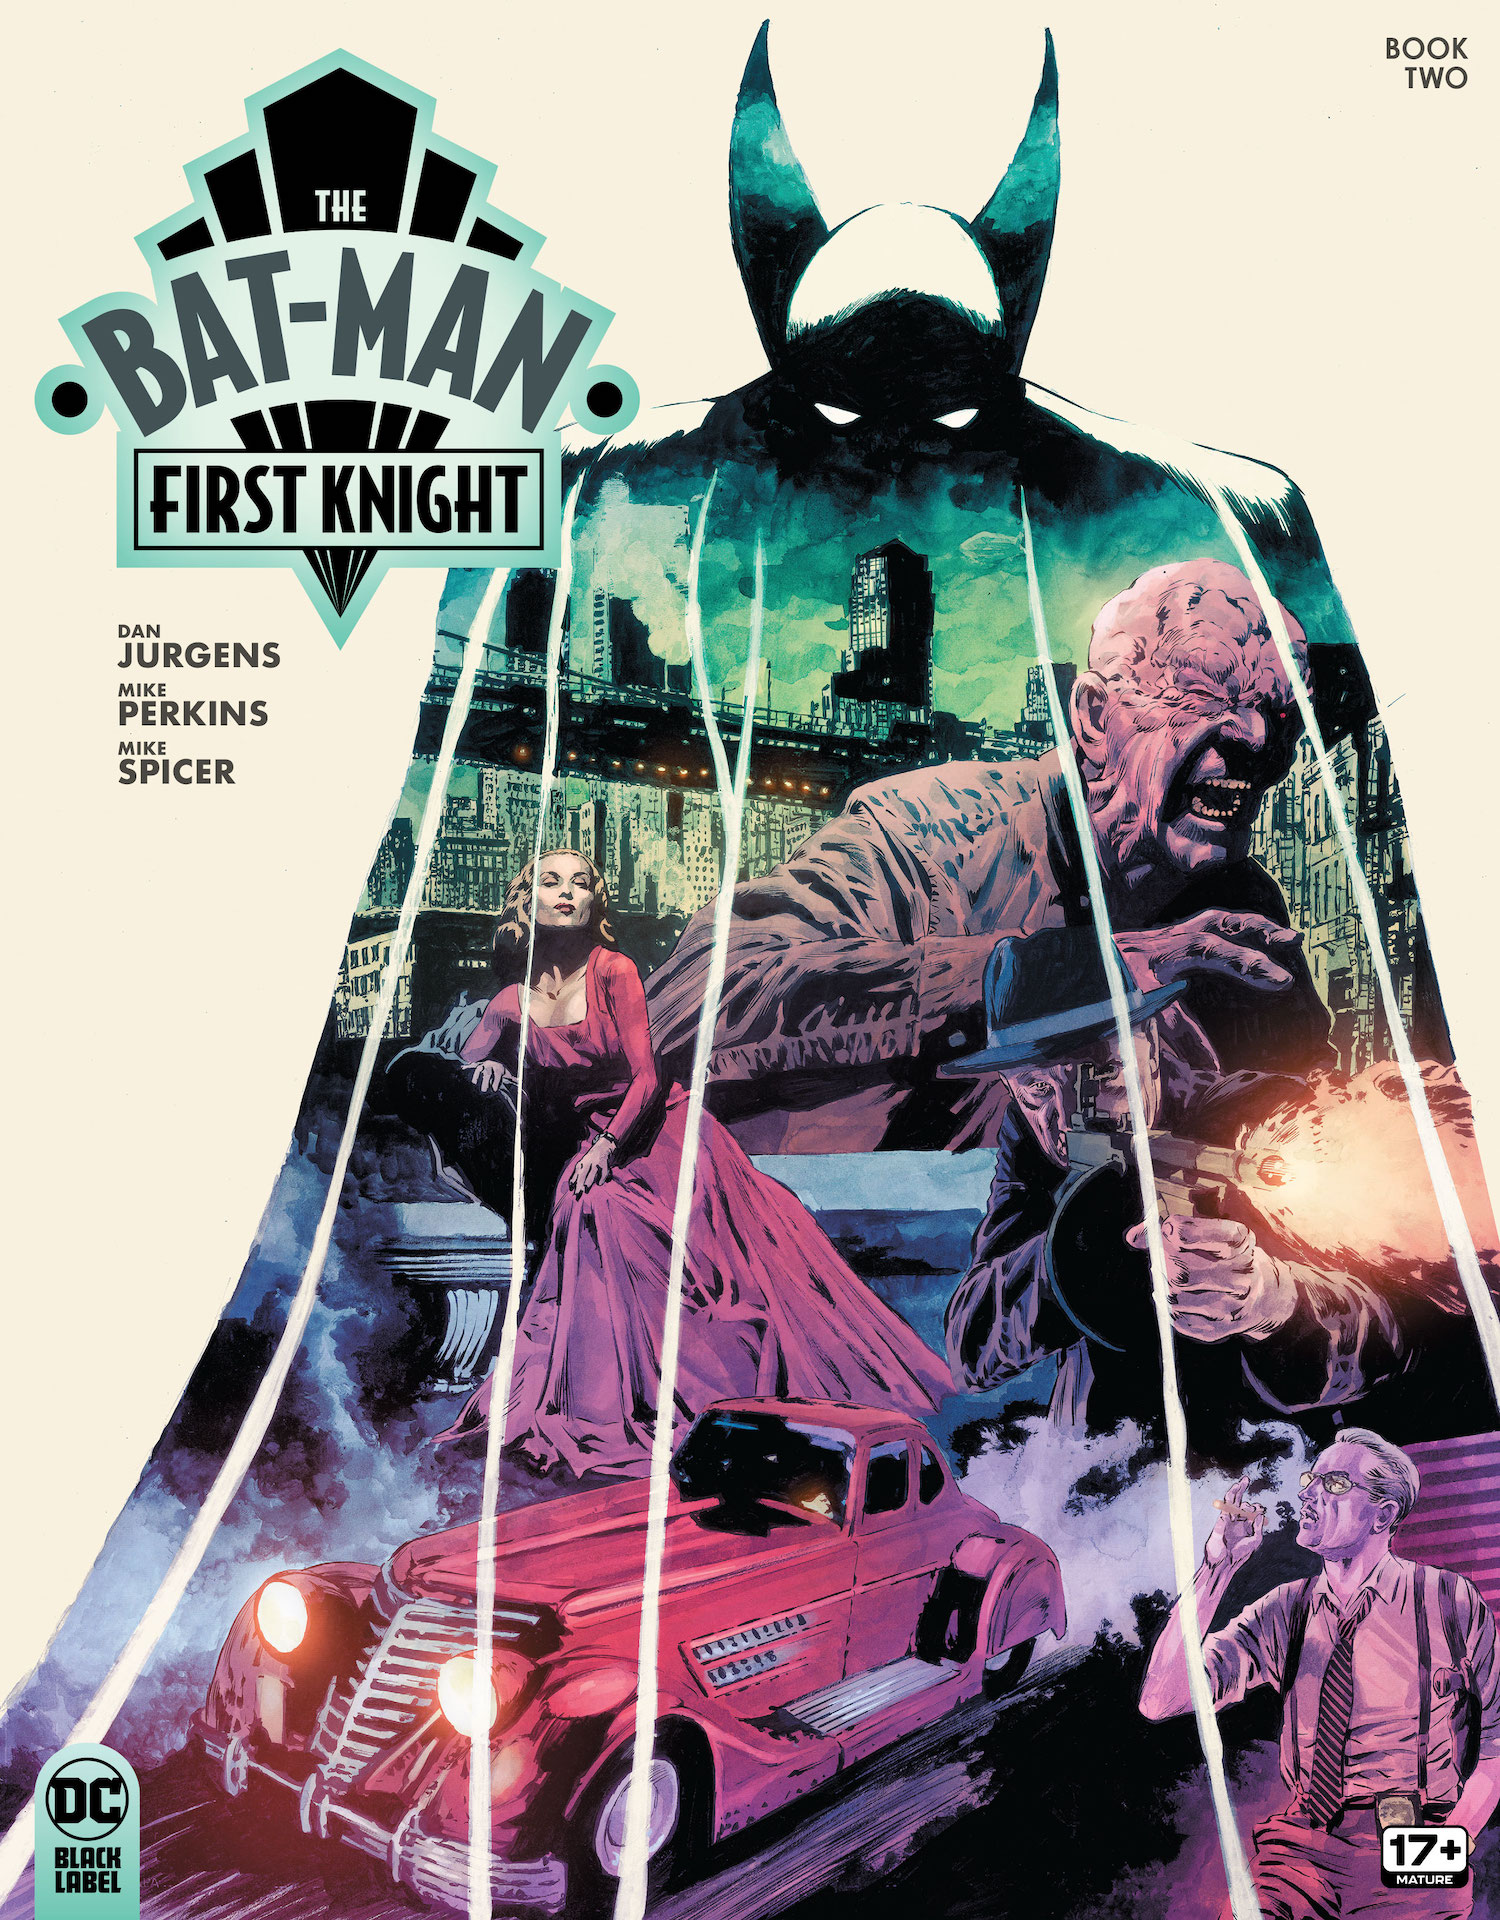 DC Preview: The Bat-Man: First Knight #2